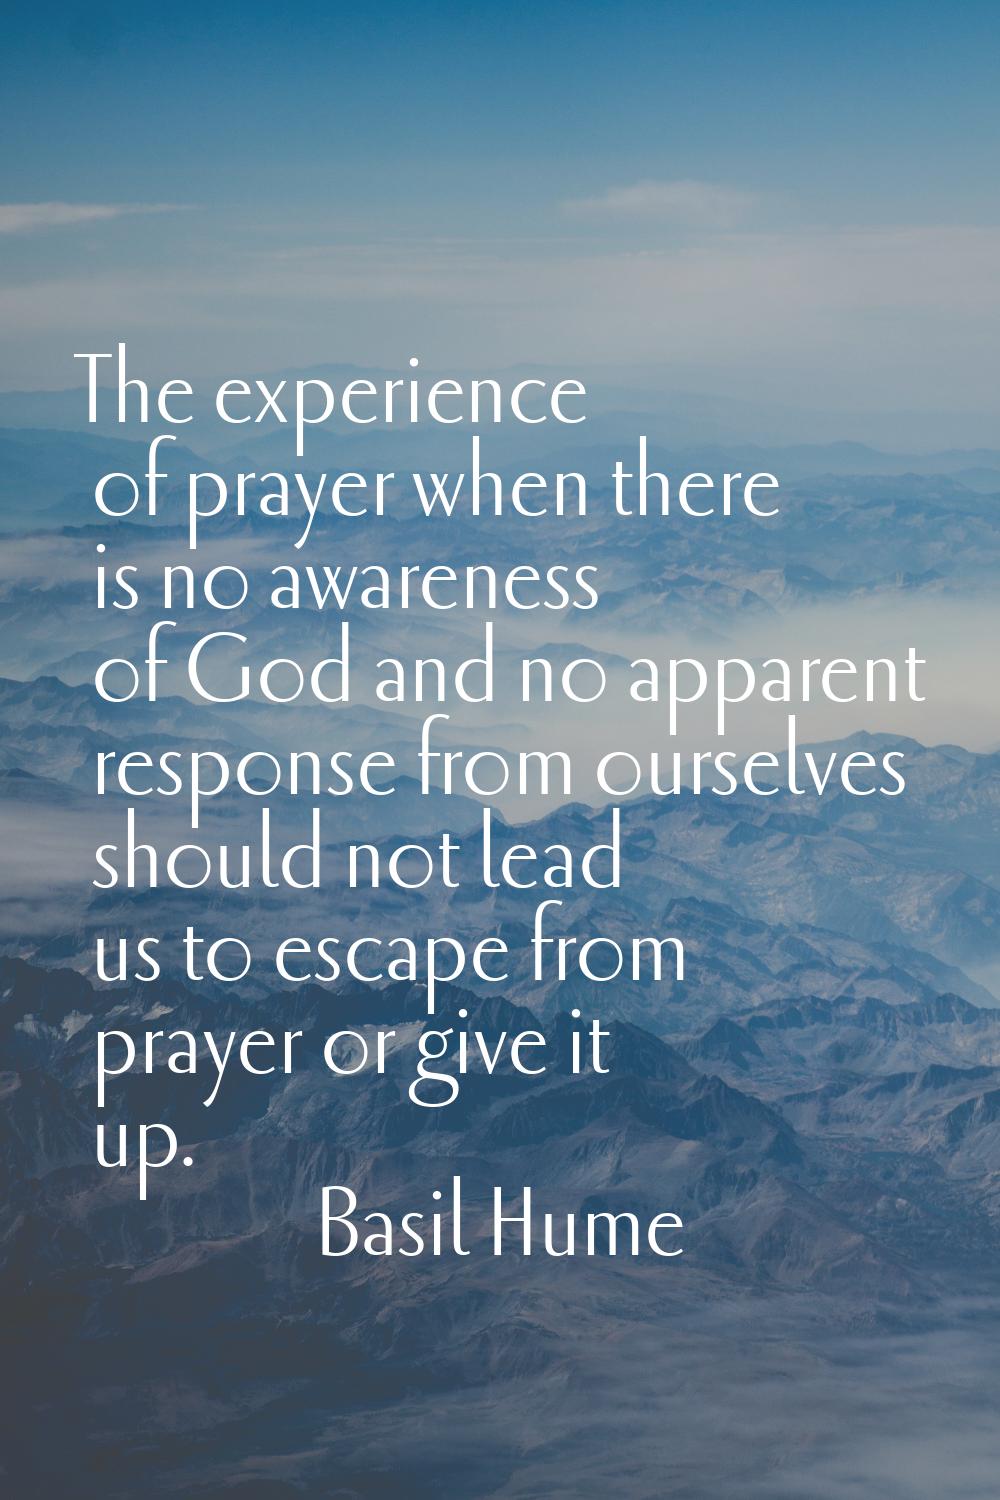 The experience of prayer when there is no awareness of God and no apparent response from ourselves 